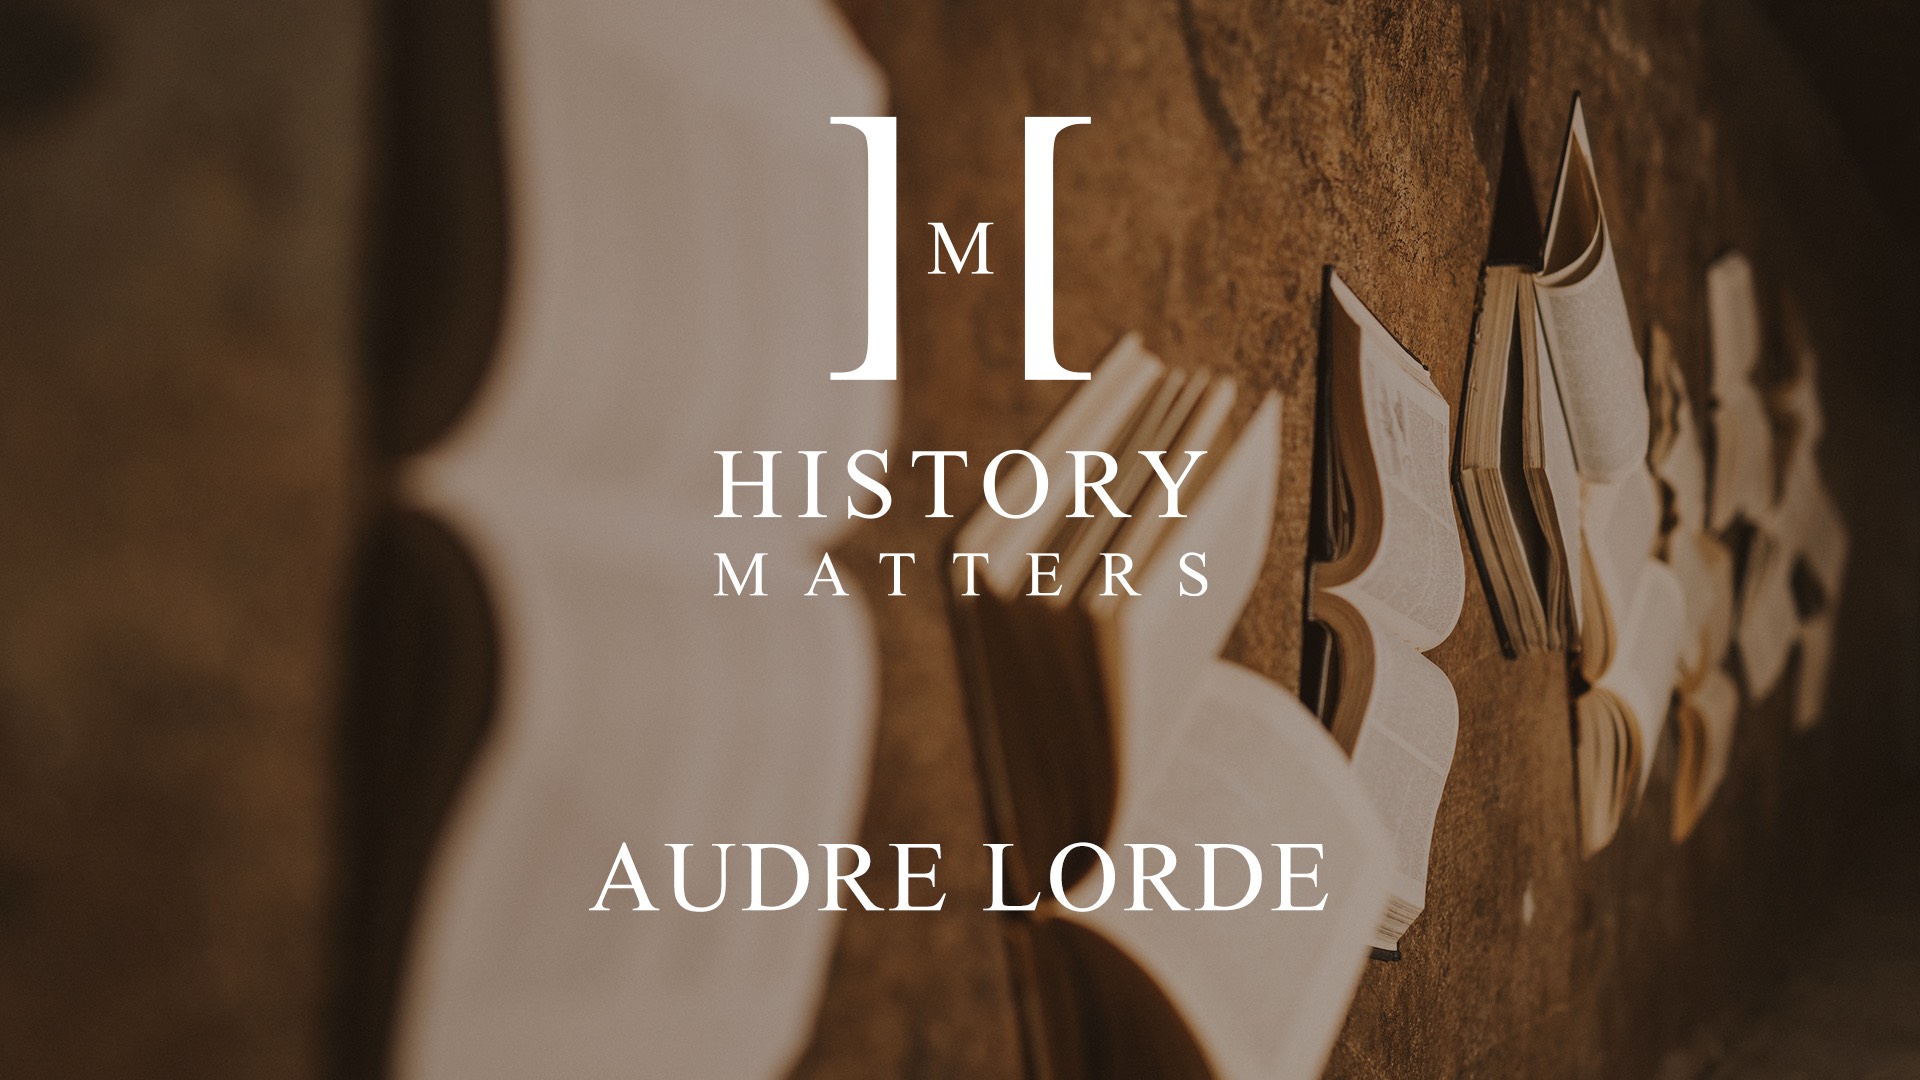 White History Matters Audre Lorde logo with background of opened books